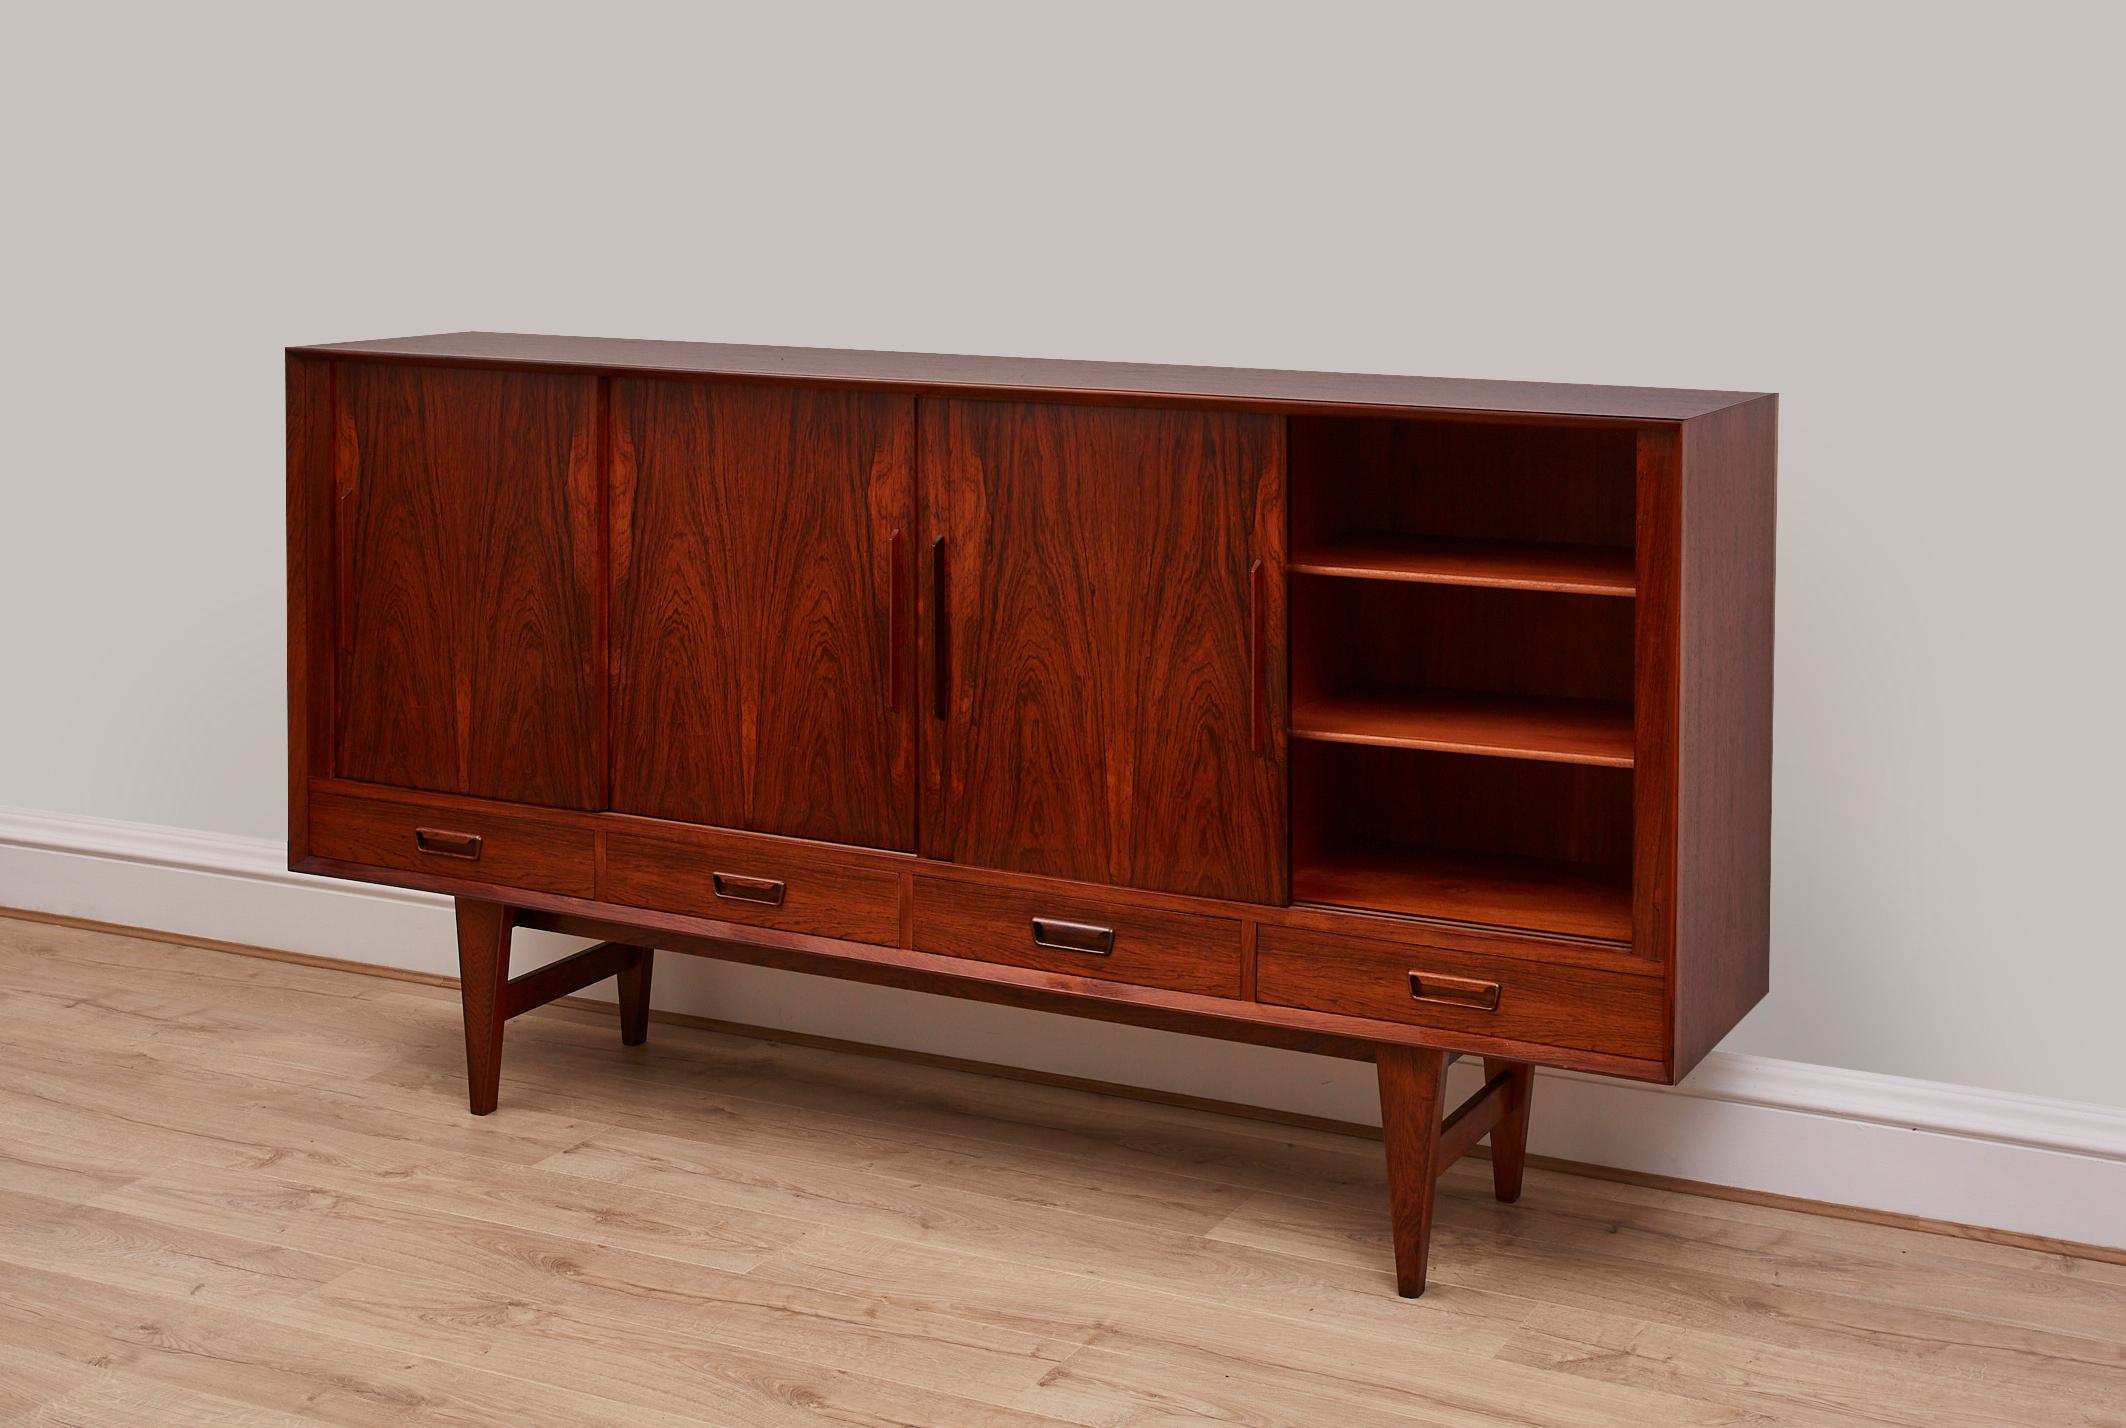 20th Century Danish 1960's Rosewood Sideboard With Inside Mirrored Bar